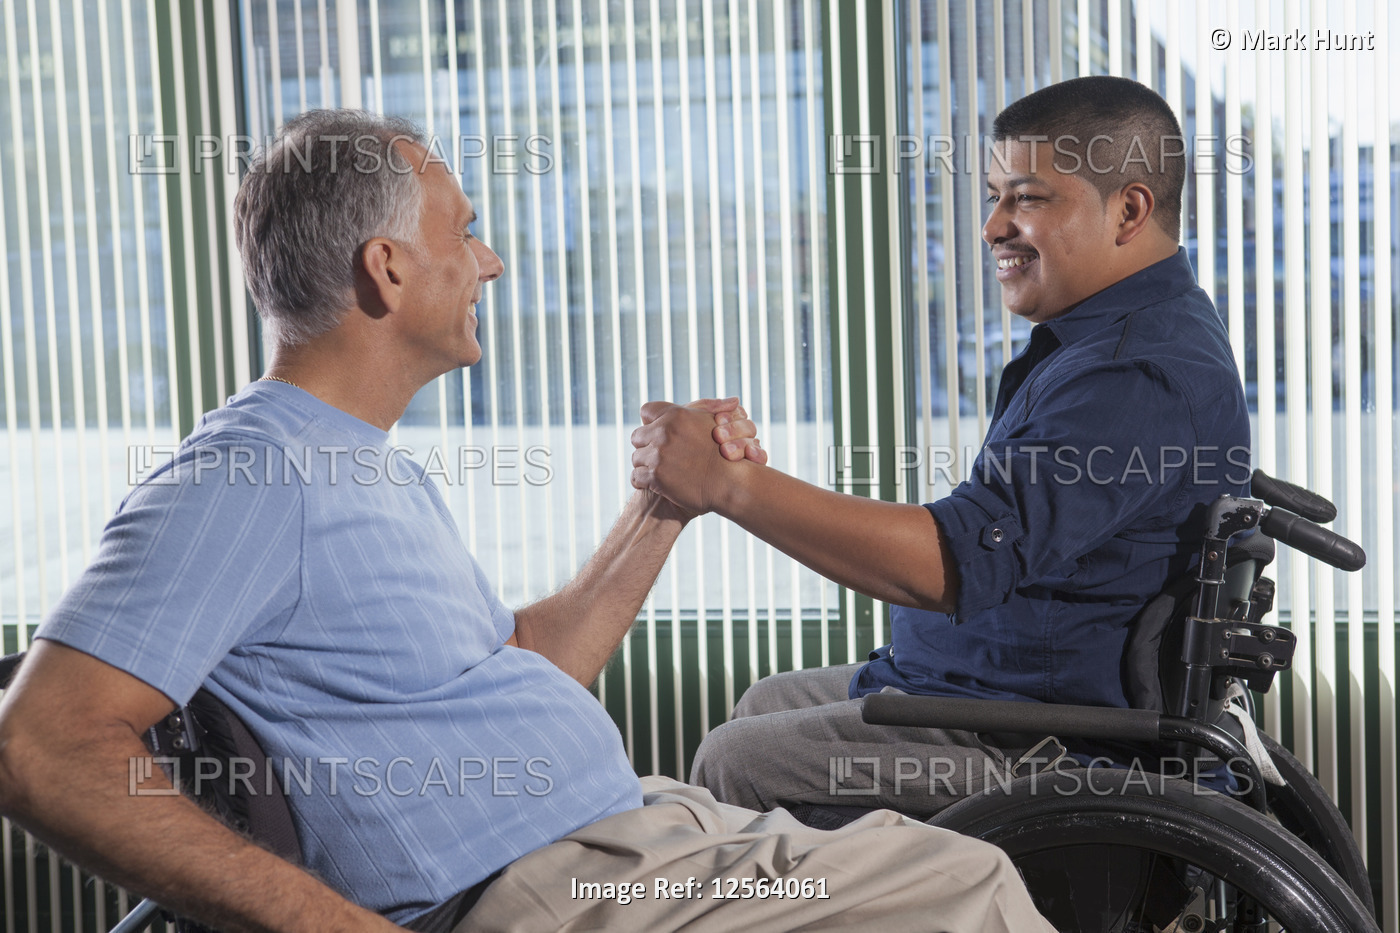 Two men with Spinal Cord Injuries shaking hands in an office